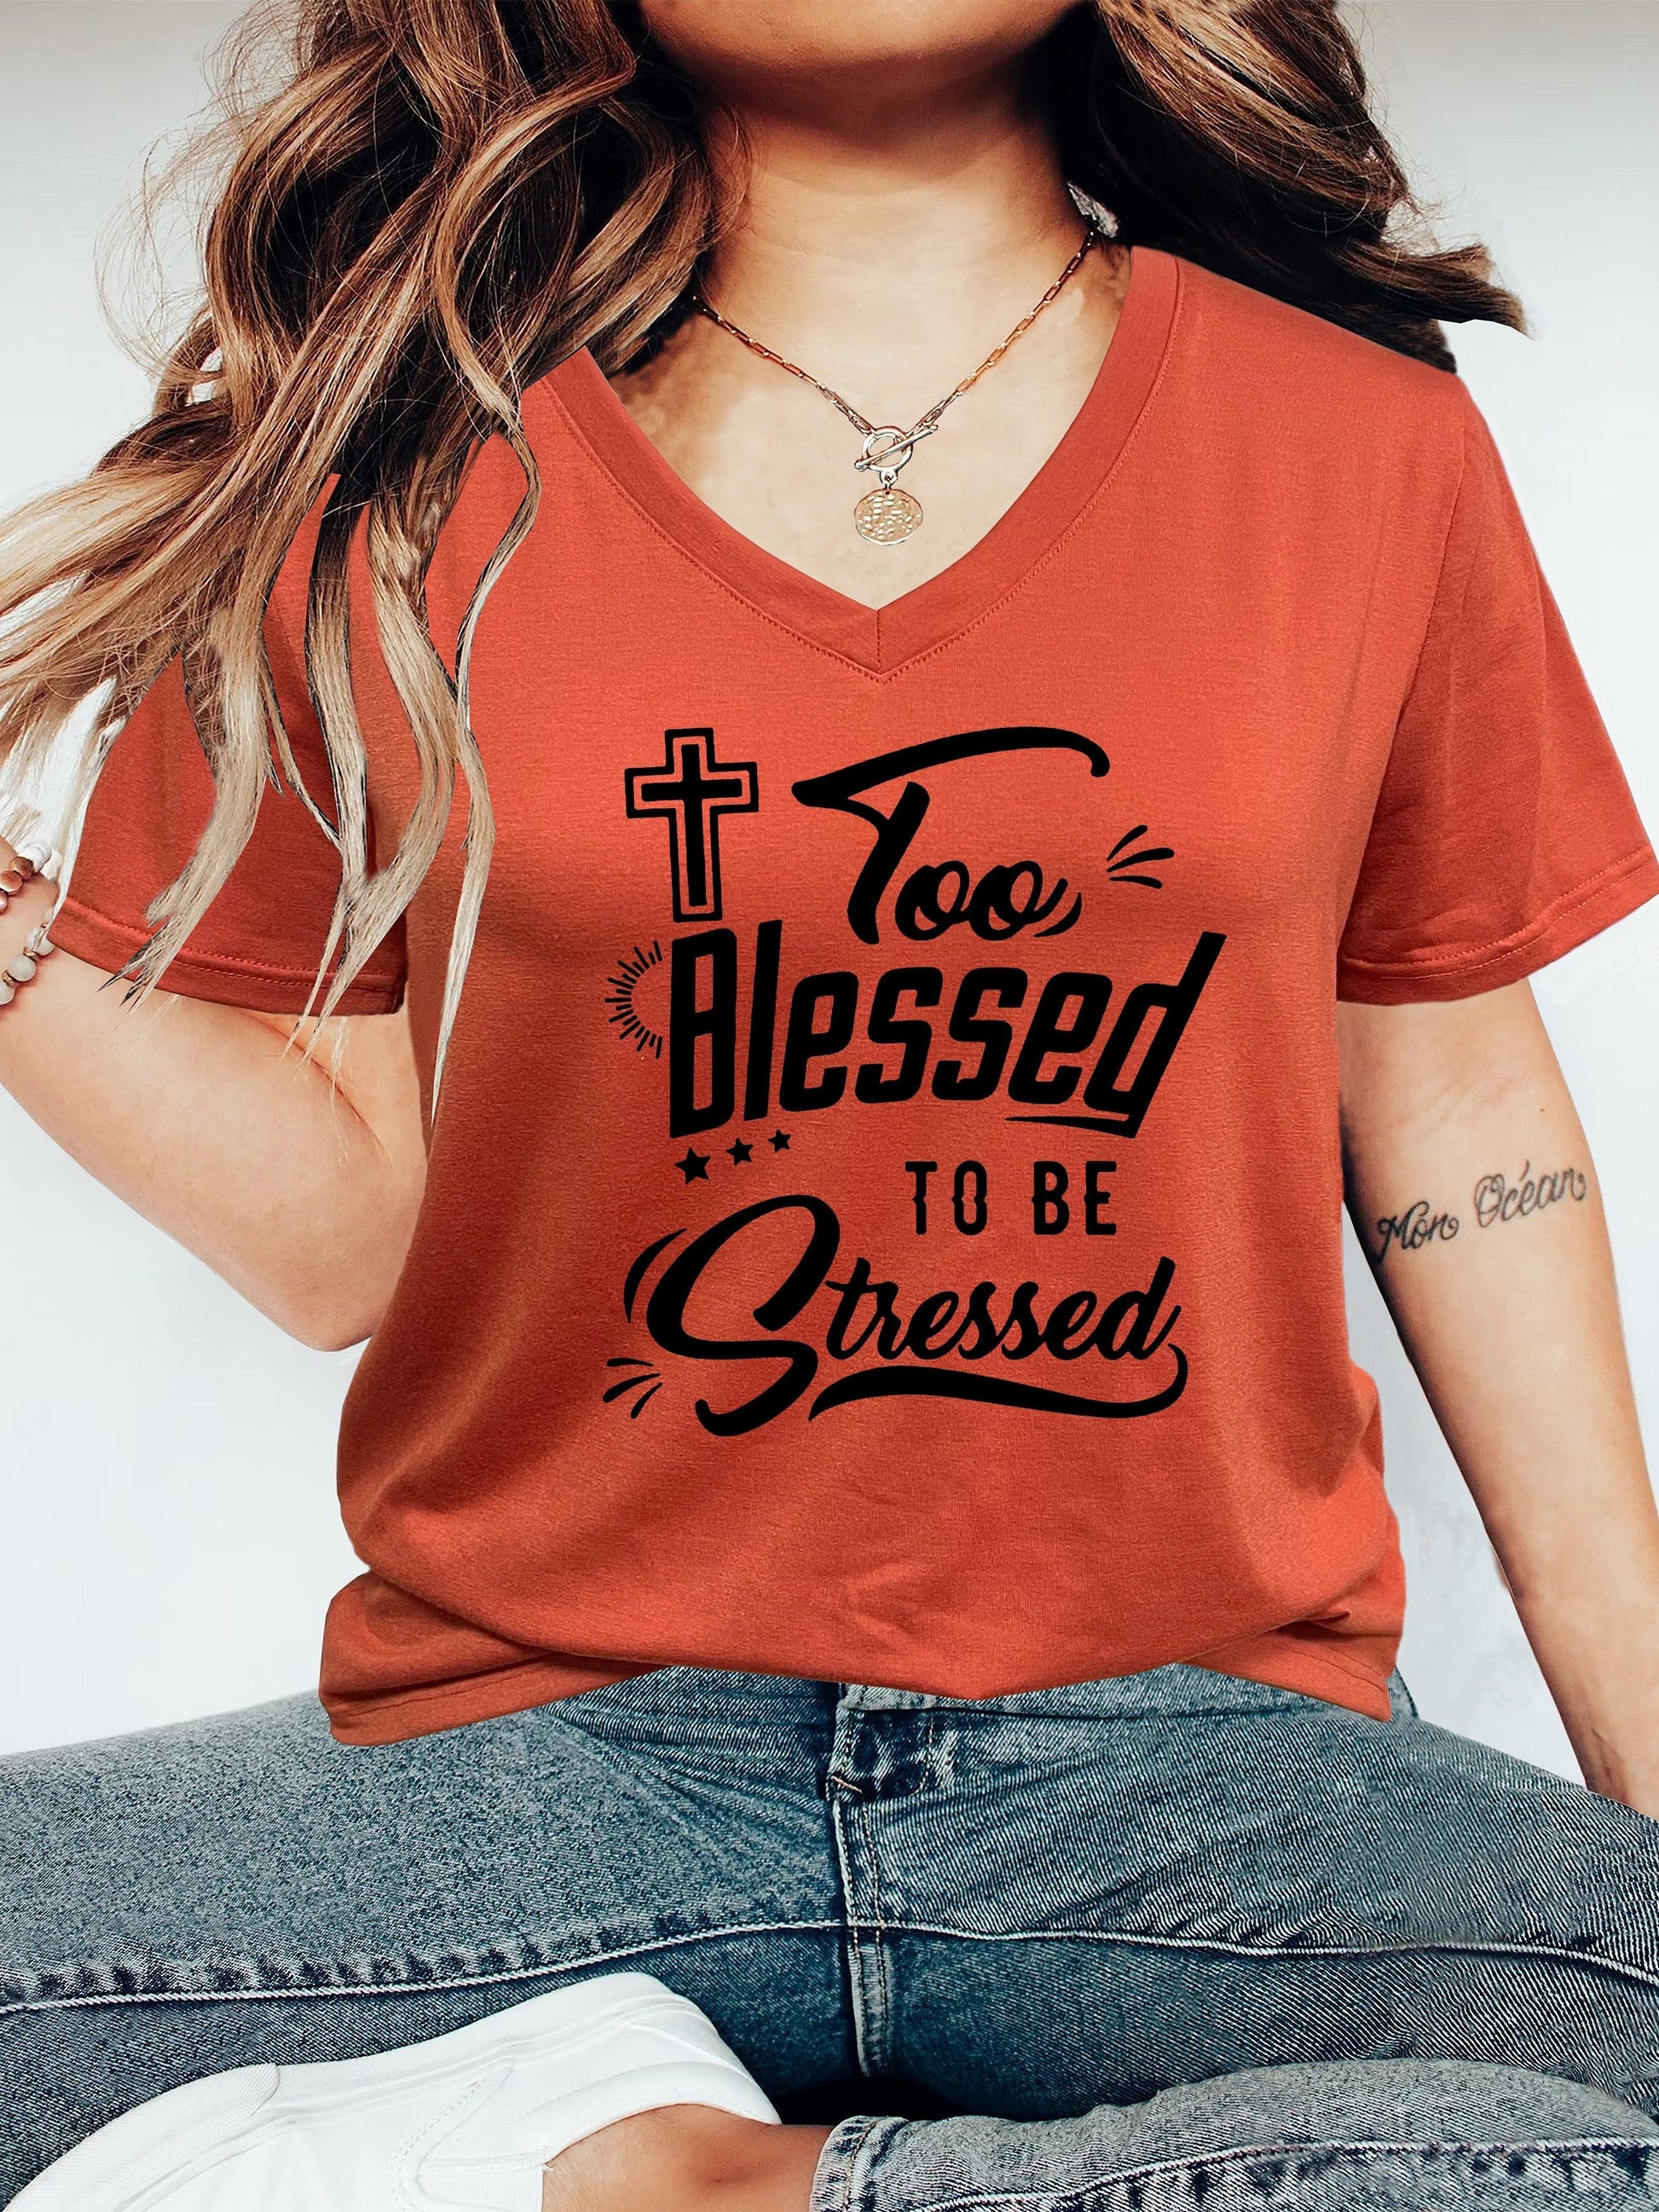 Too Blessed To Be Stressed Plus Size V Neck Women's Christian T-shirt claimedbygoddesigns